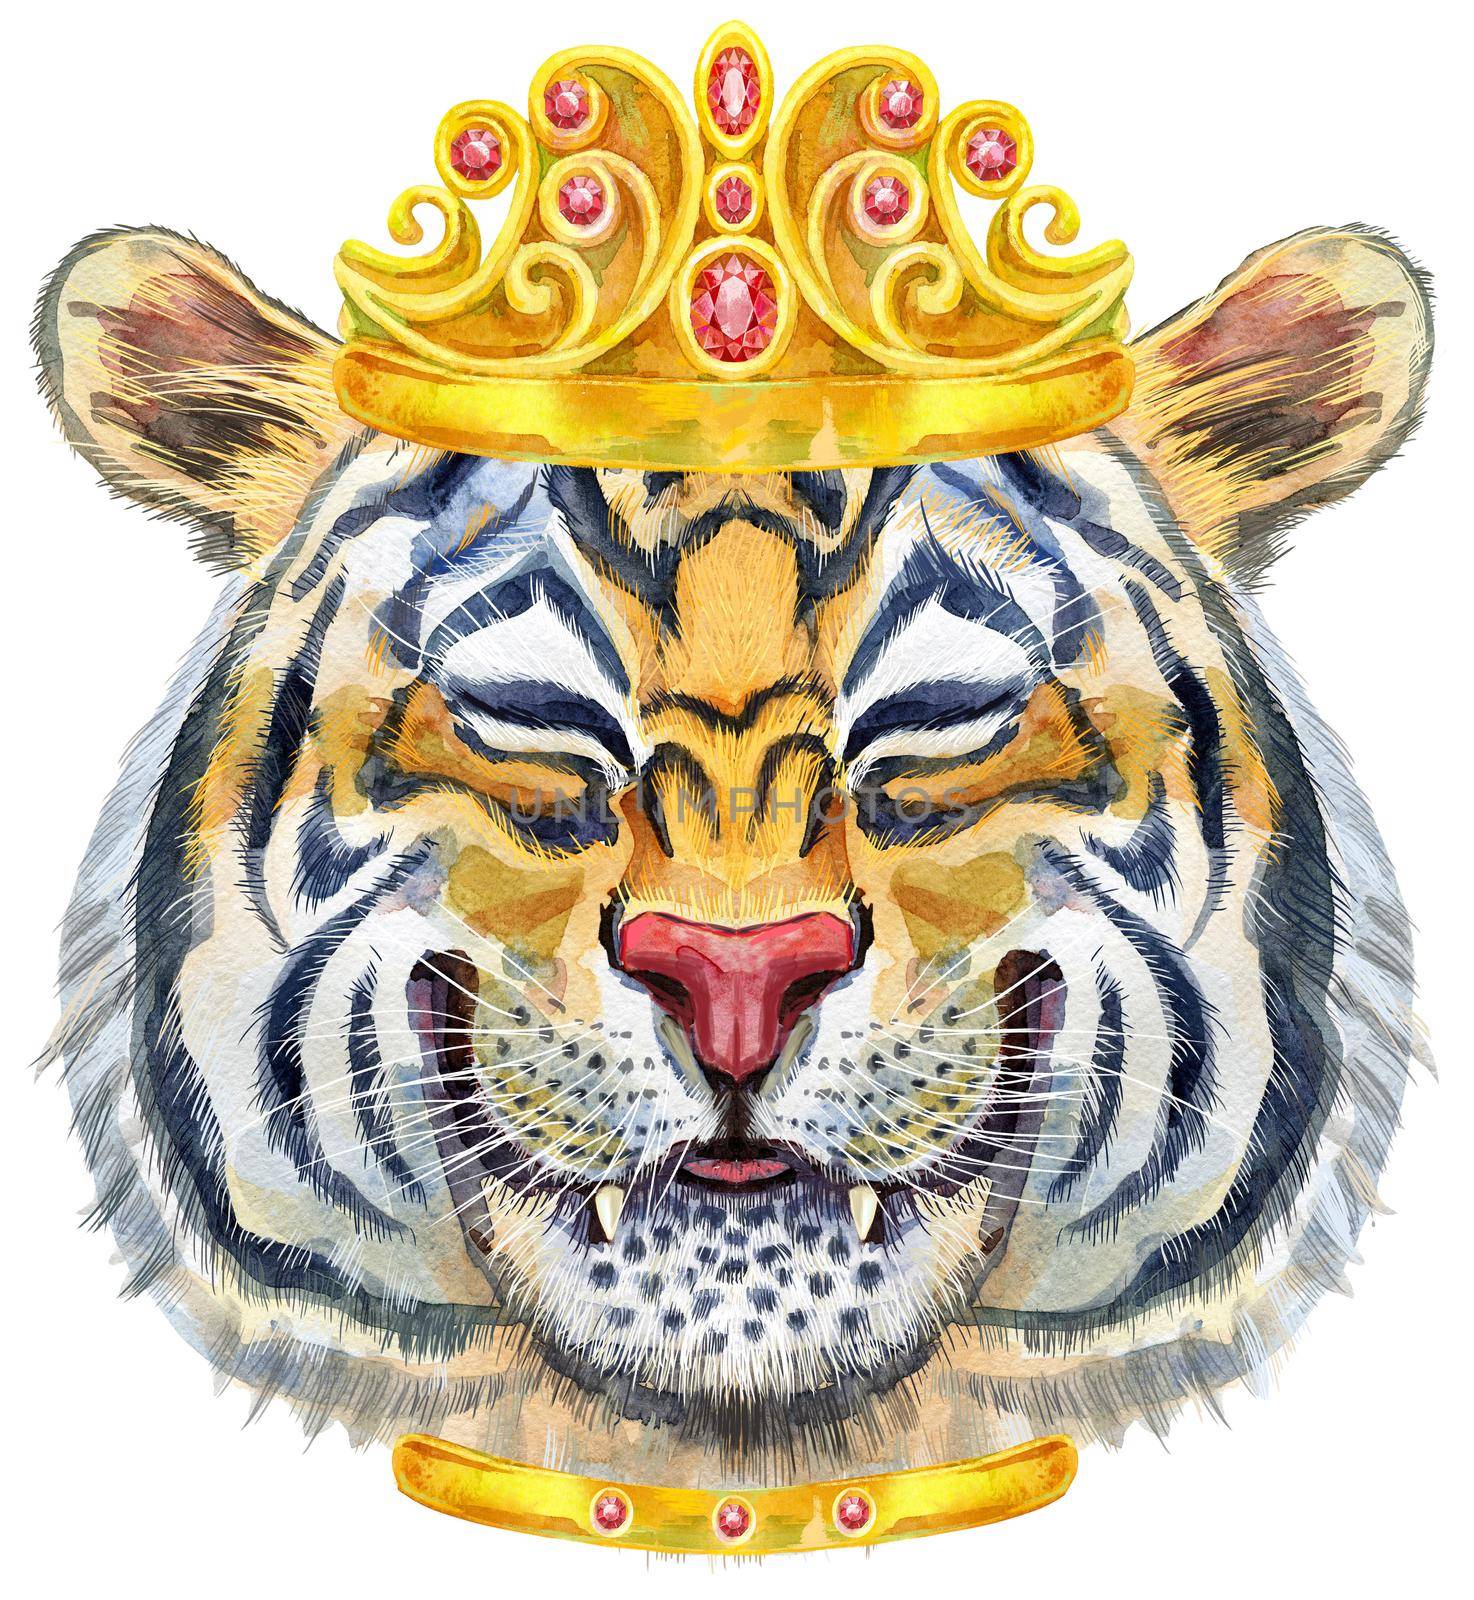 Colorful orange smiling tiger with golden crown. Wild animal watercolor illustration on white background by NataOmsk